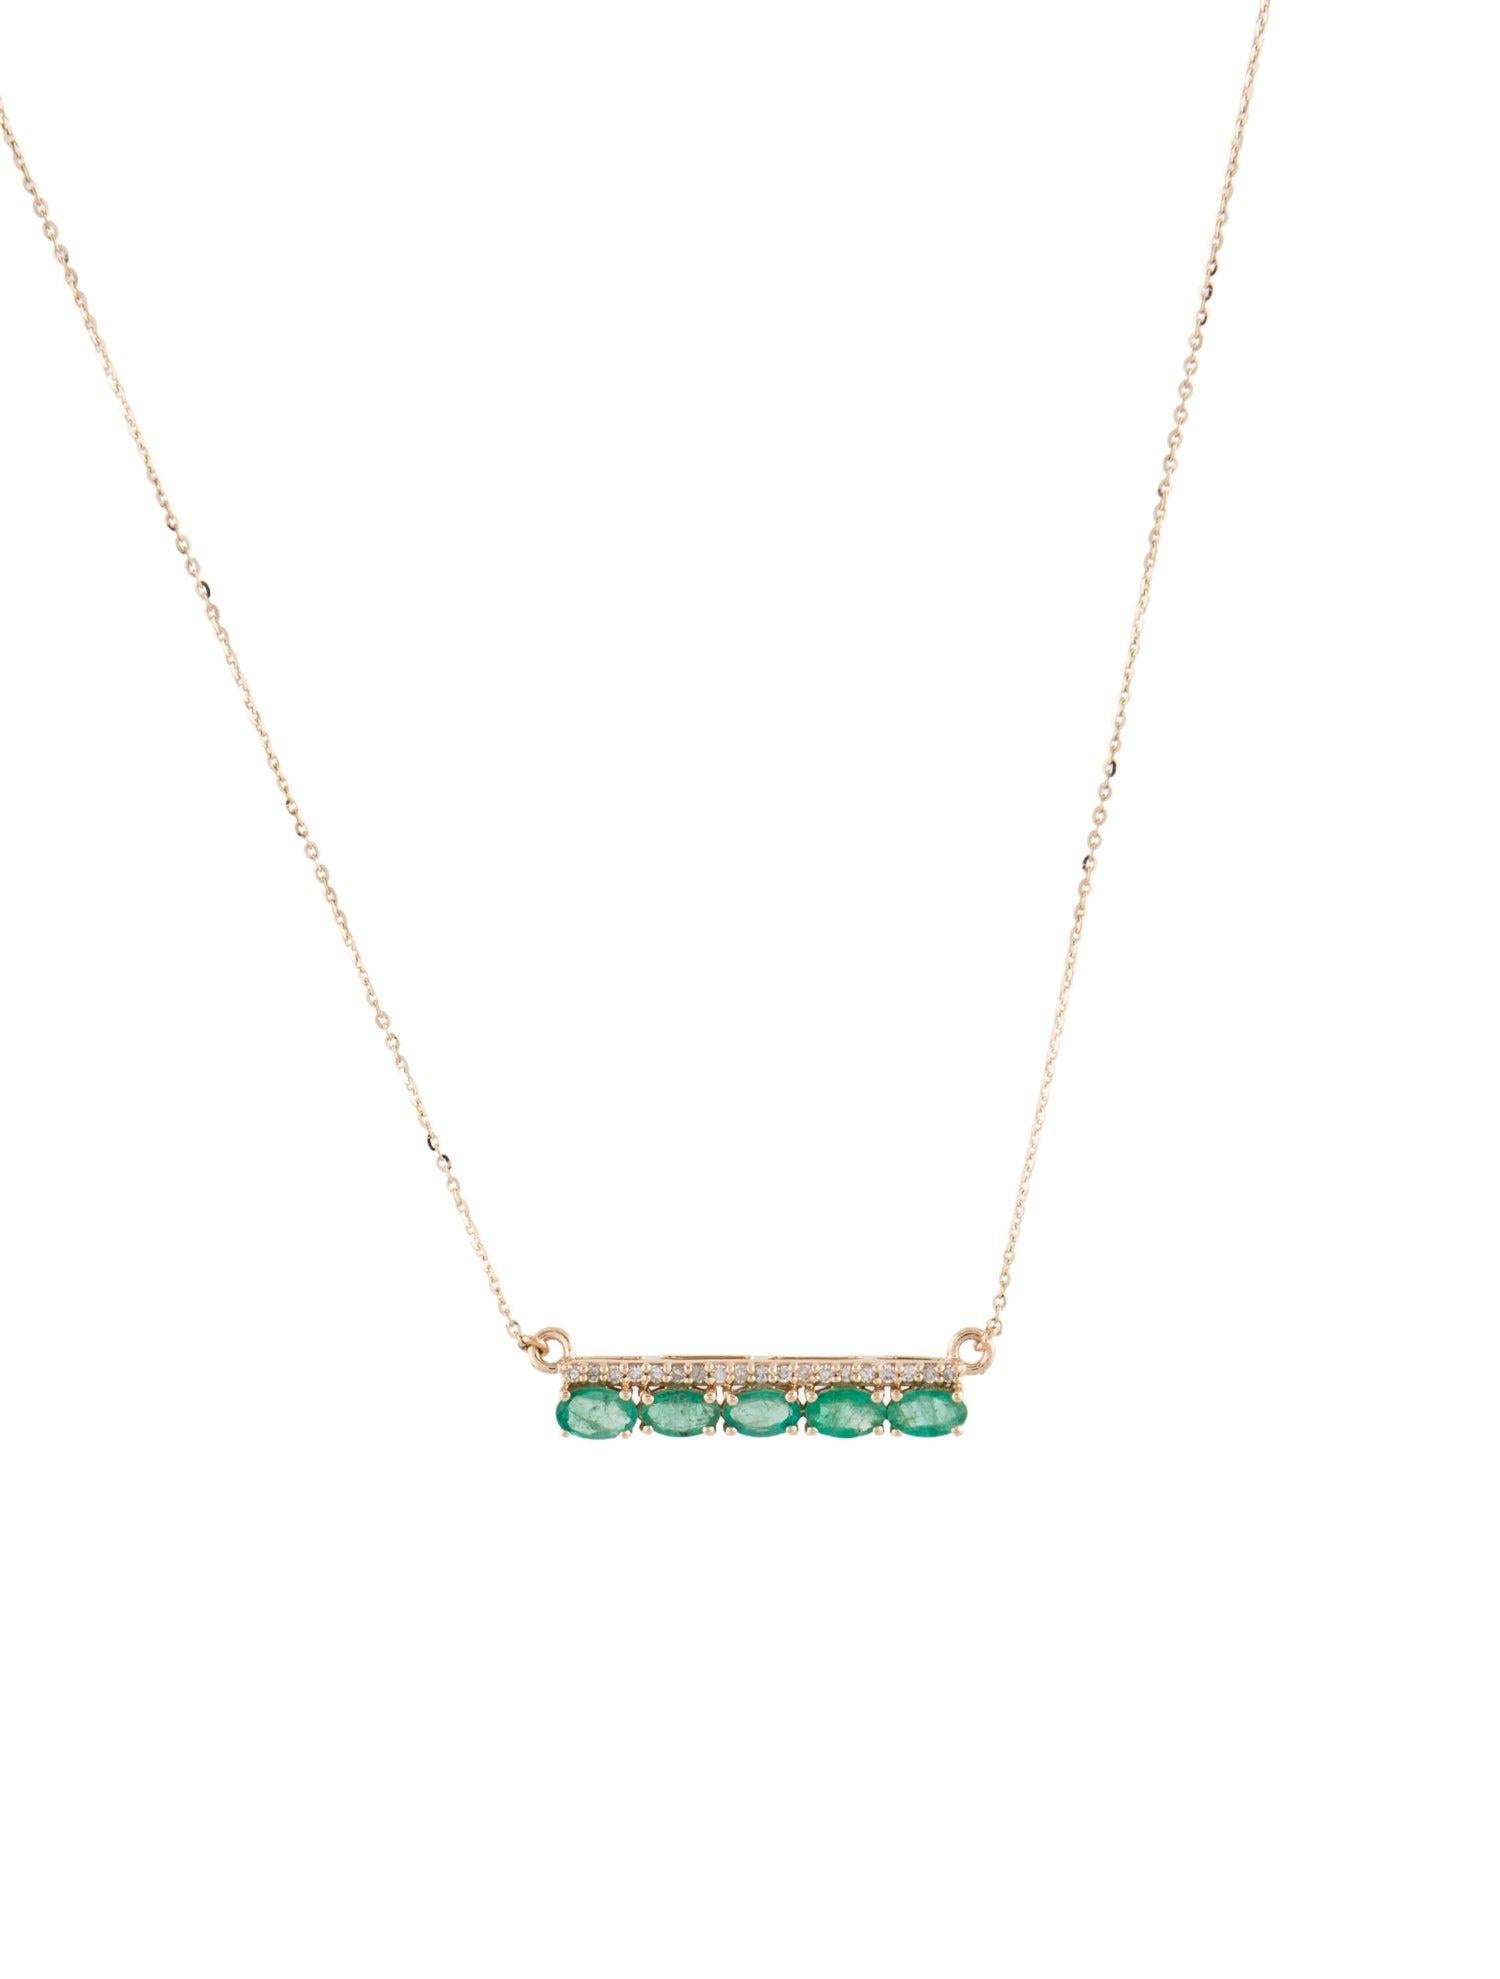 14K 1.07ctw Emerald & Diamond Pendant Necklace: Exquisite Luxury Statement Piece In New Condition For Sale In Holtsville, NY